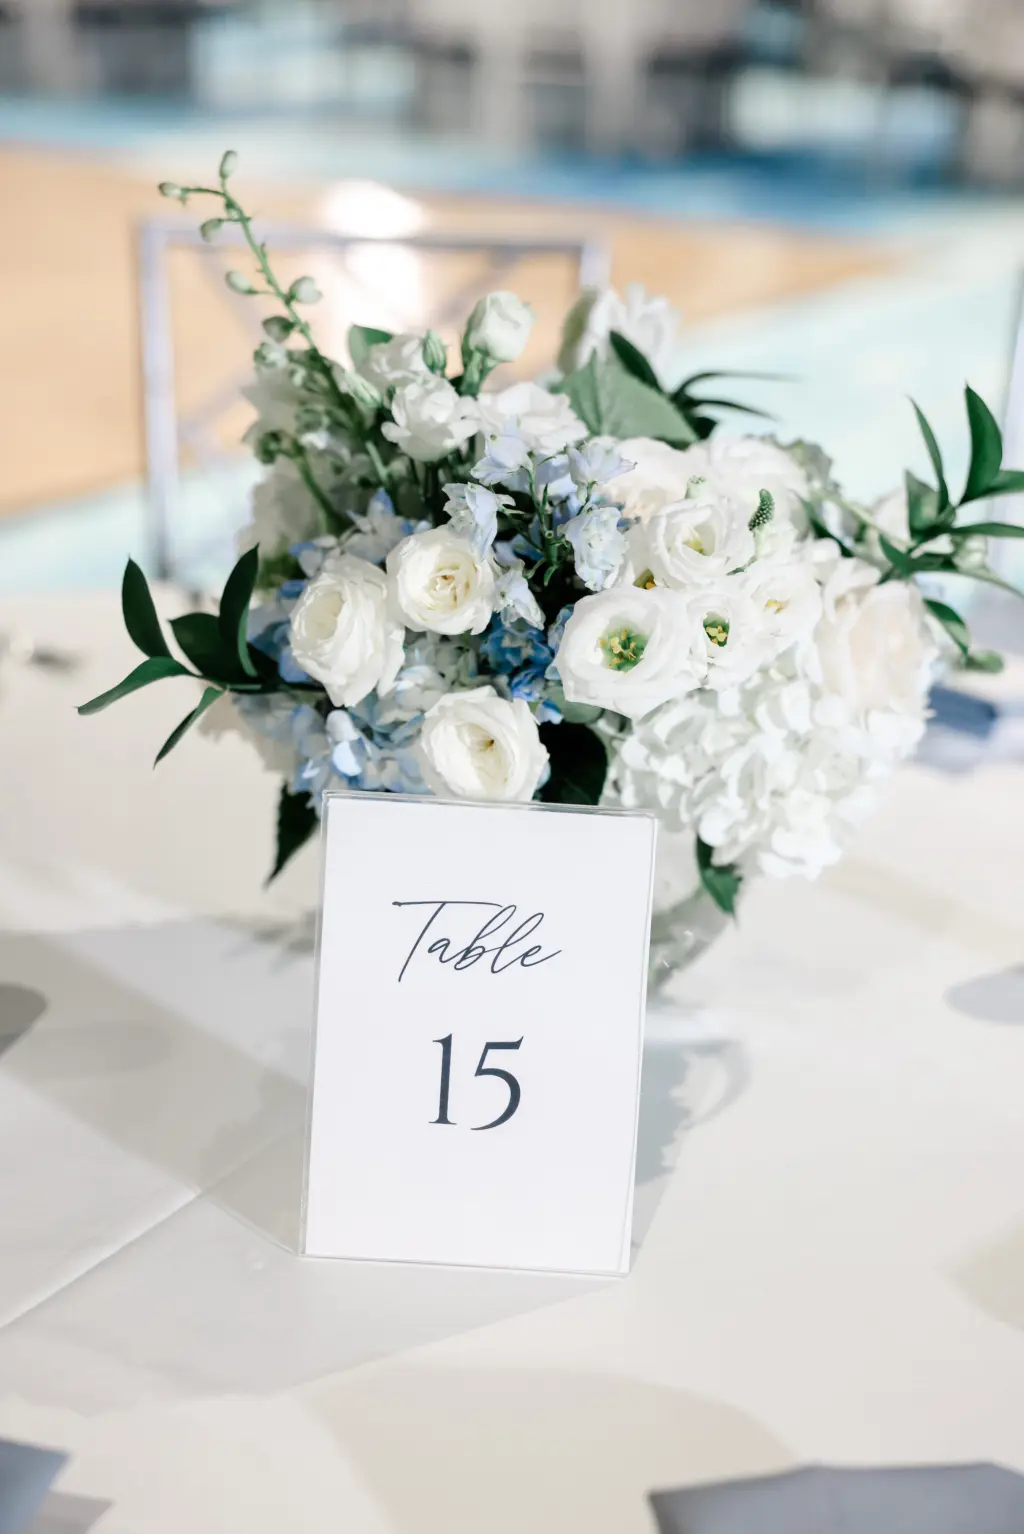 White Table Number Card Ideas | White Roses, Blue Hydrangeas, and Greenery Centerpiece Inspiration